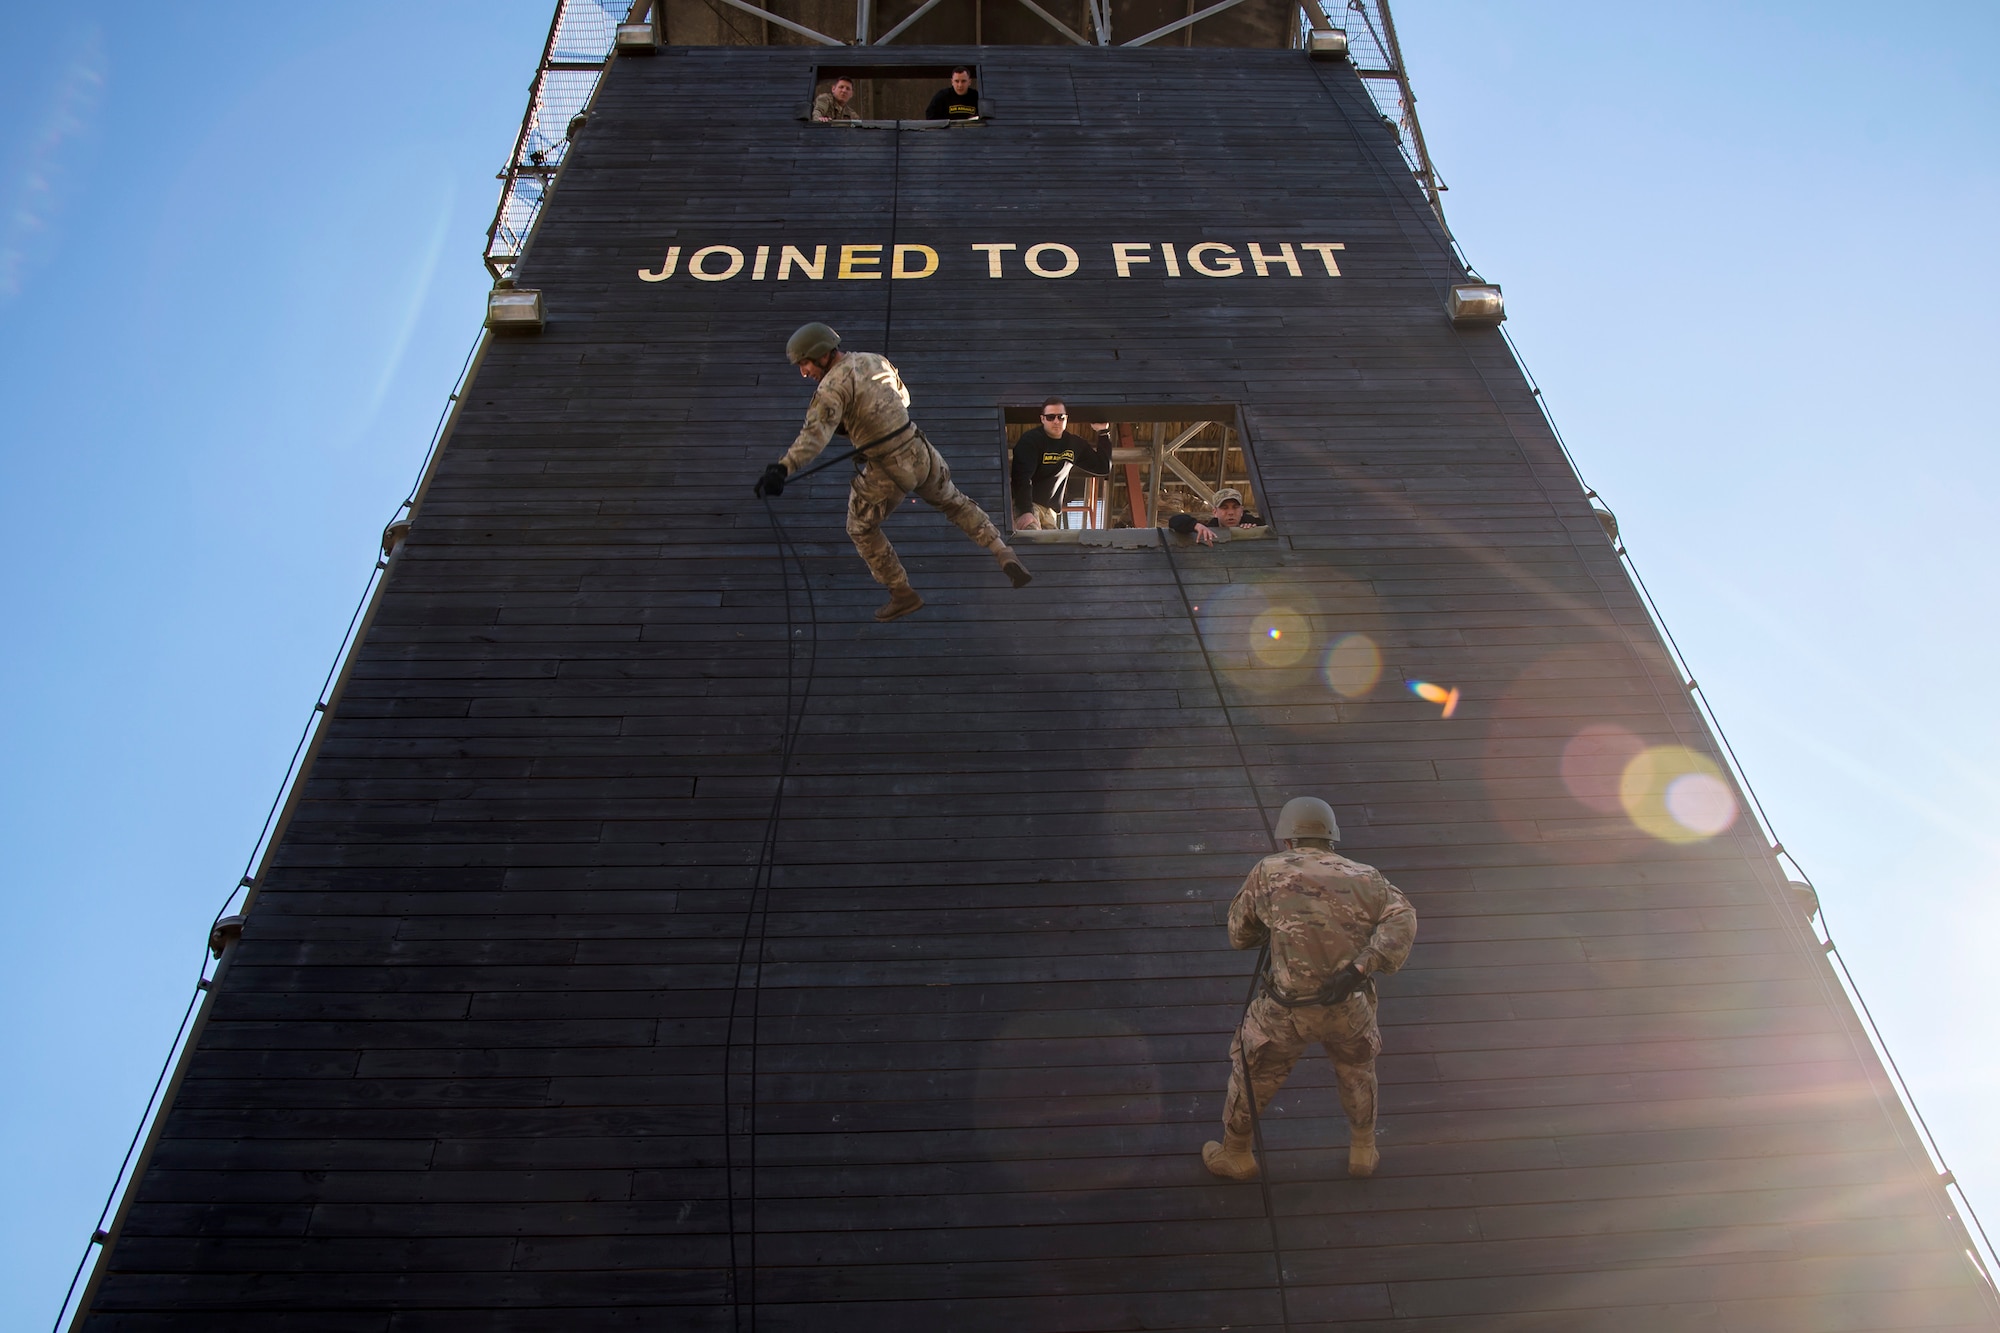 Airmen rappel down the Safeside Rappel tower during an Army Air Assault Assessment (AAA), Jan. 28, 2019, at Moody Air Force Base, Ga. Airmen demonstrated their comprehensive rappel tower knowledge to help determine their overall readiness for Army Air Assault school (U.S. Air Force photo by Airman First Class Eugene Oliver)